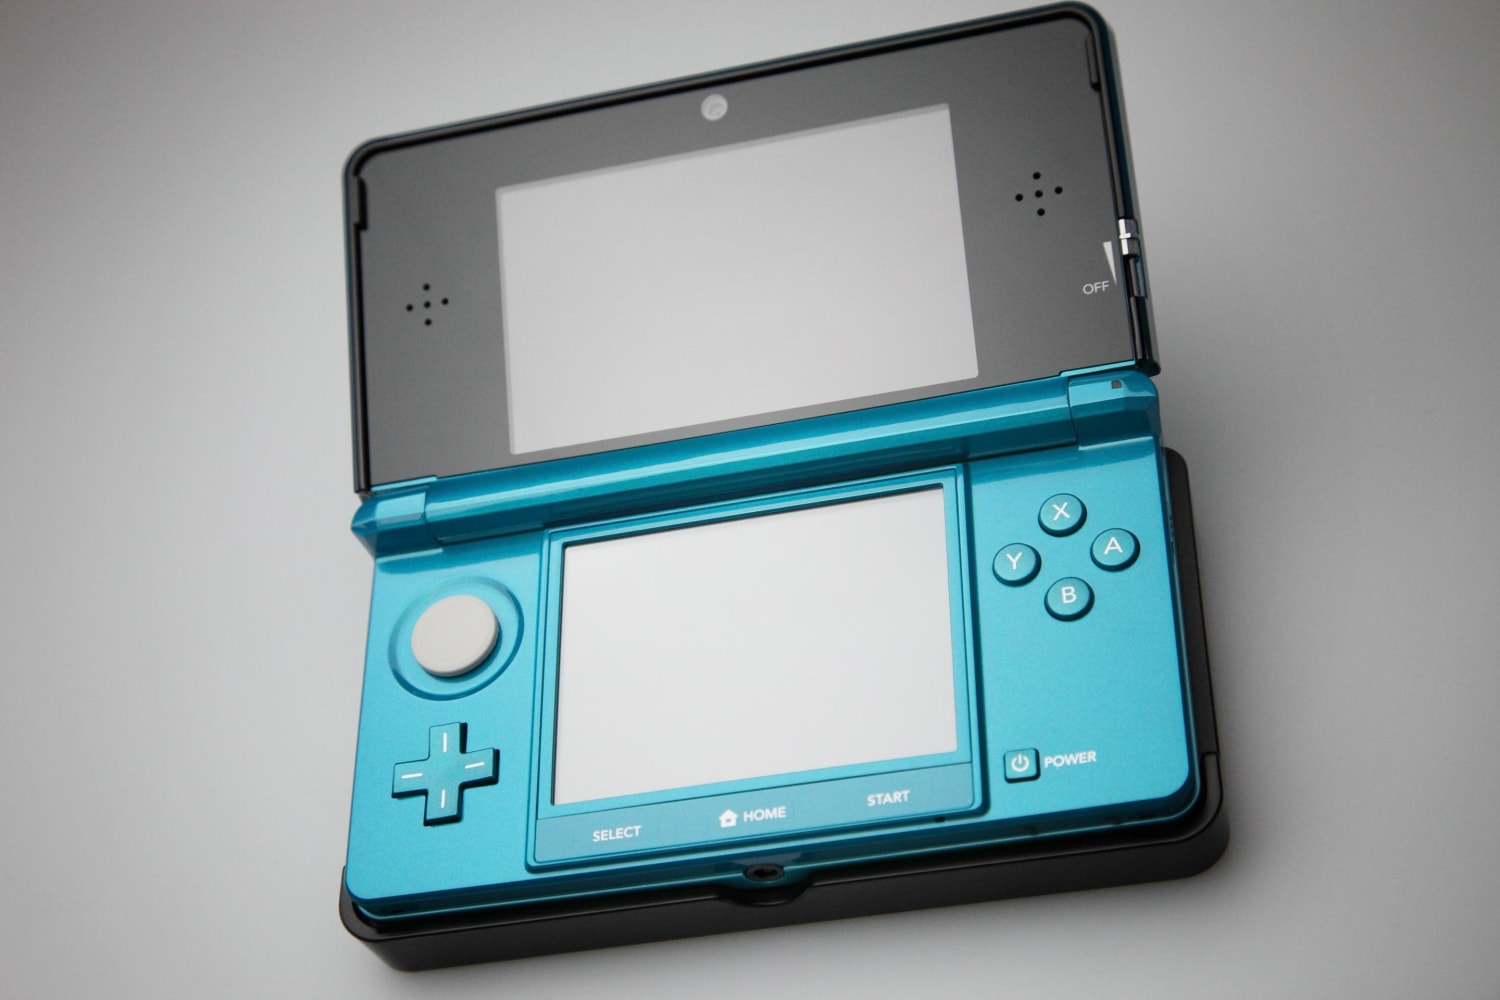 Eddike dø Lægge sammen Fixed that for you: 10 ways to boost the Nintendo 3DS